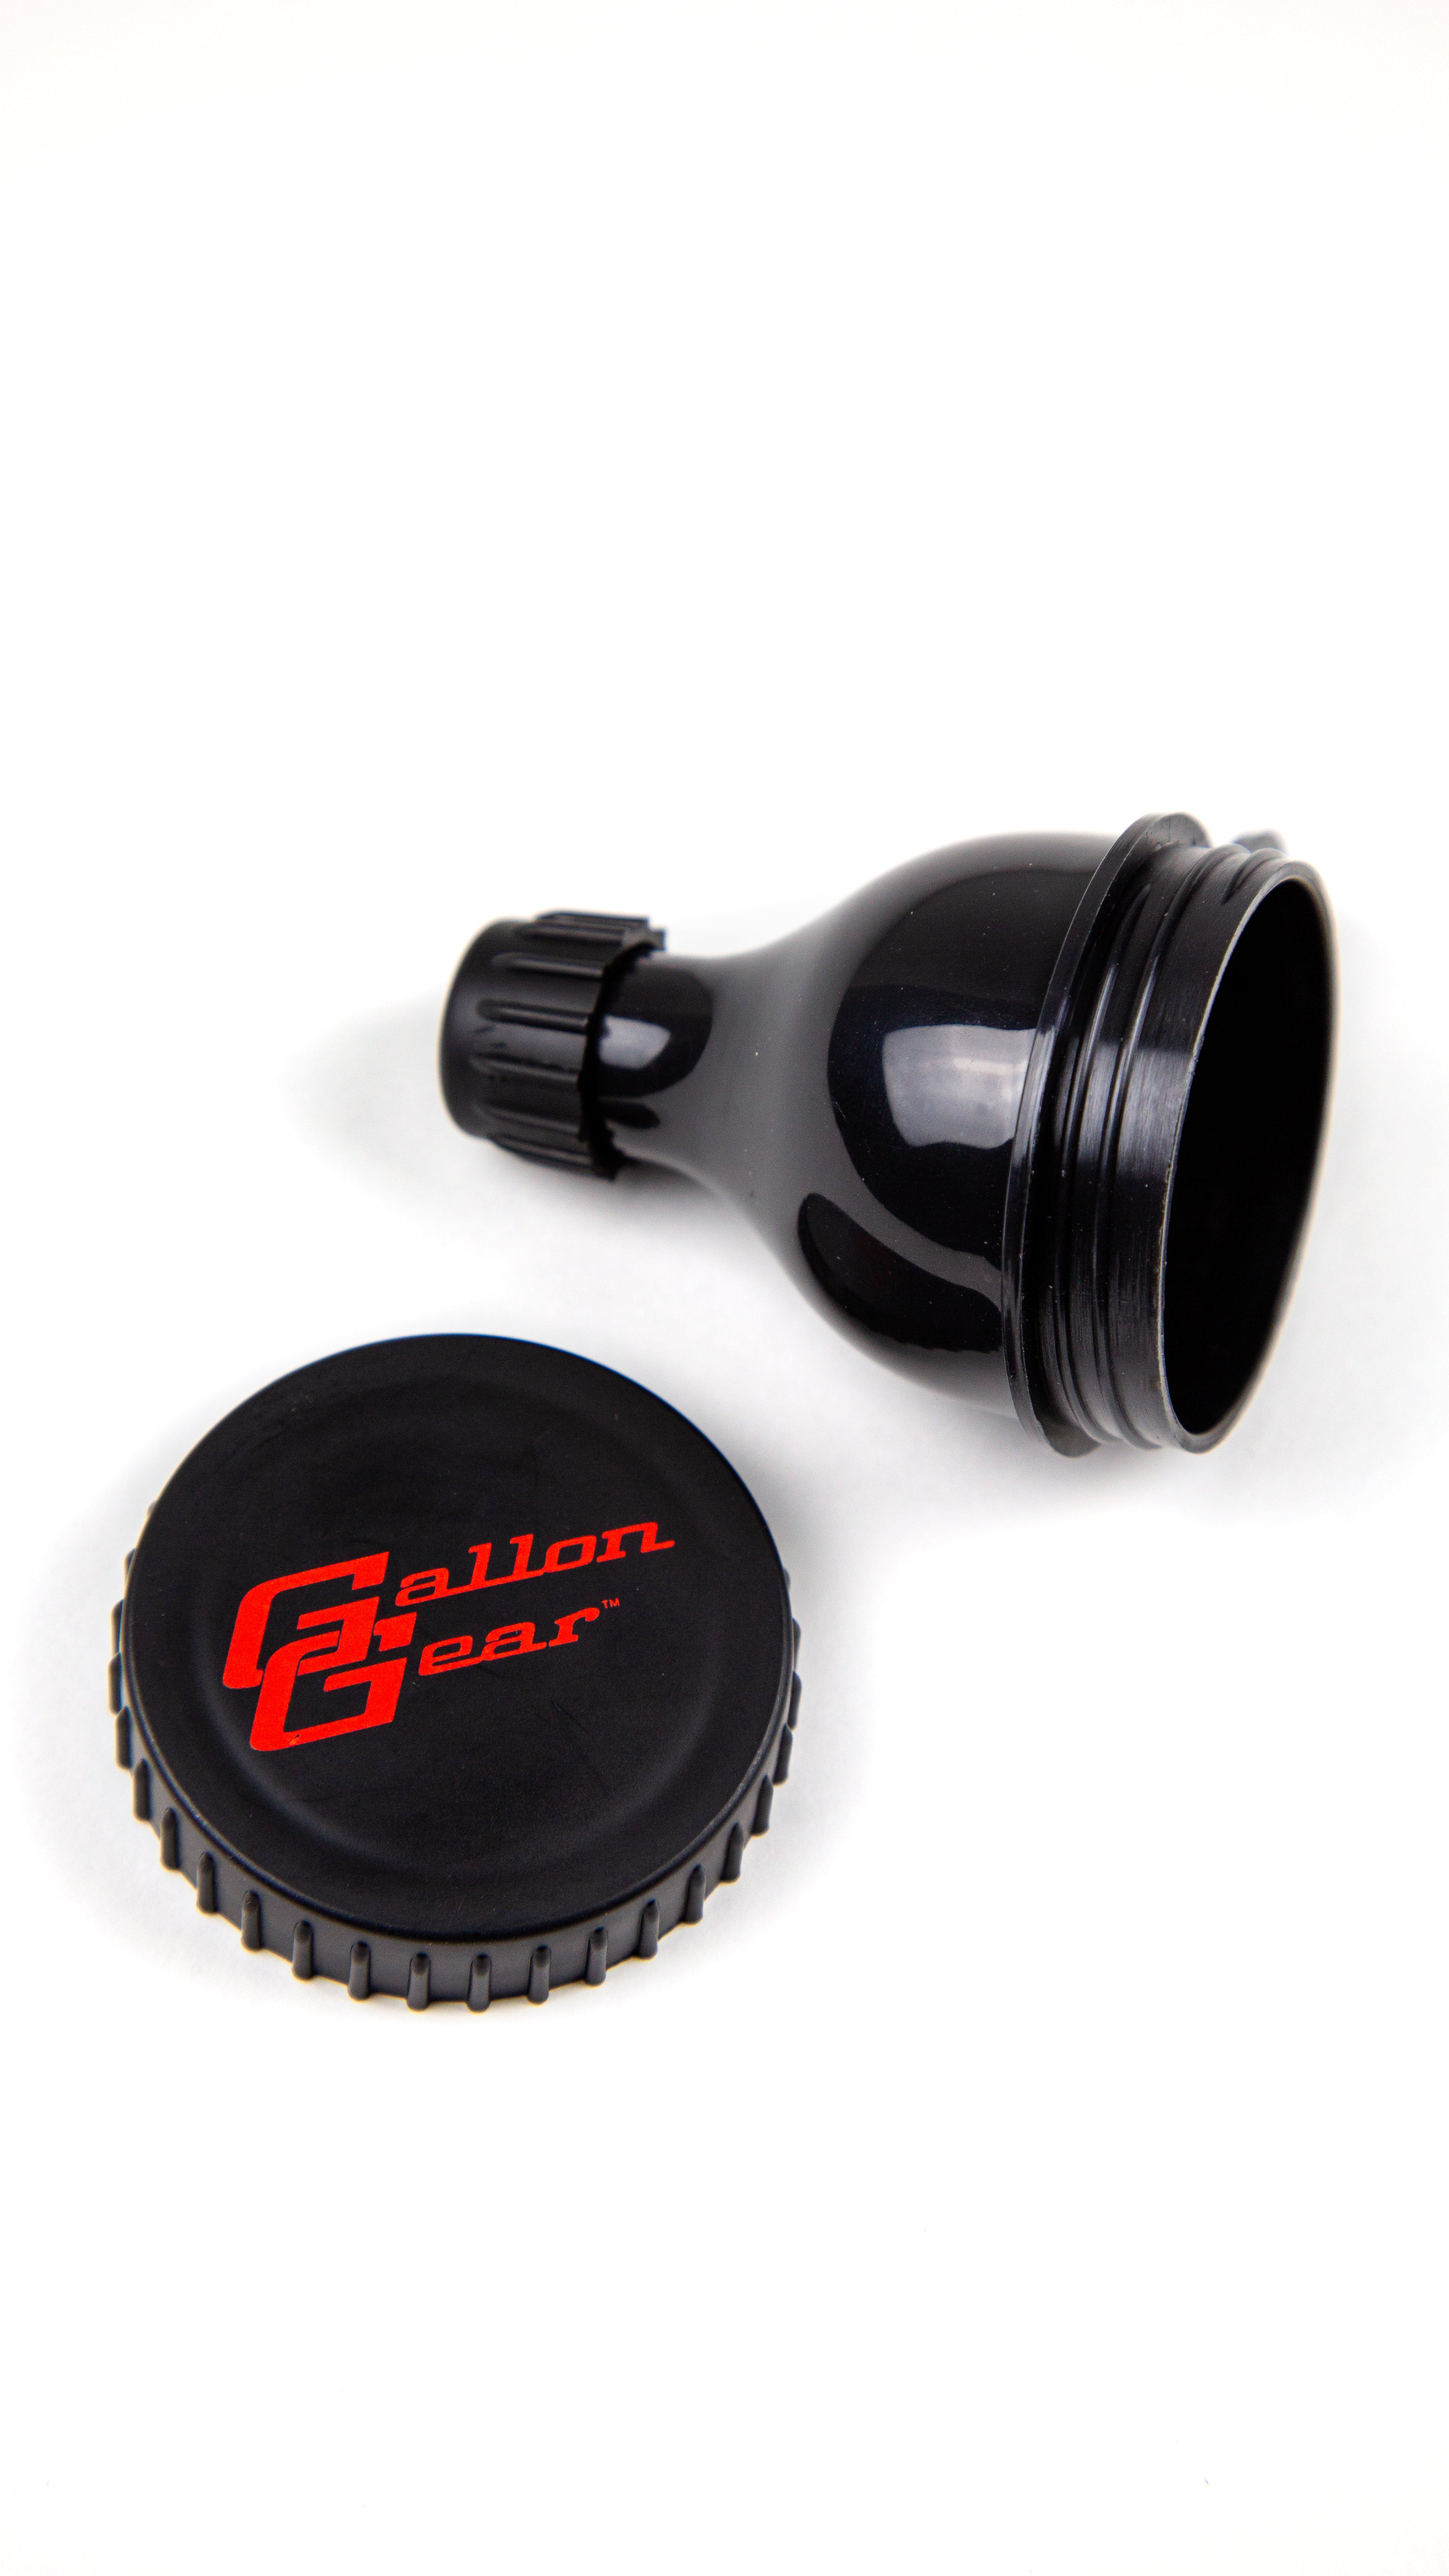 Black and Red Gallon Gear Supplement Funnel